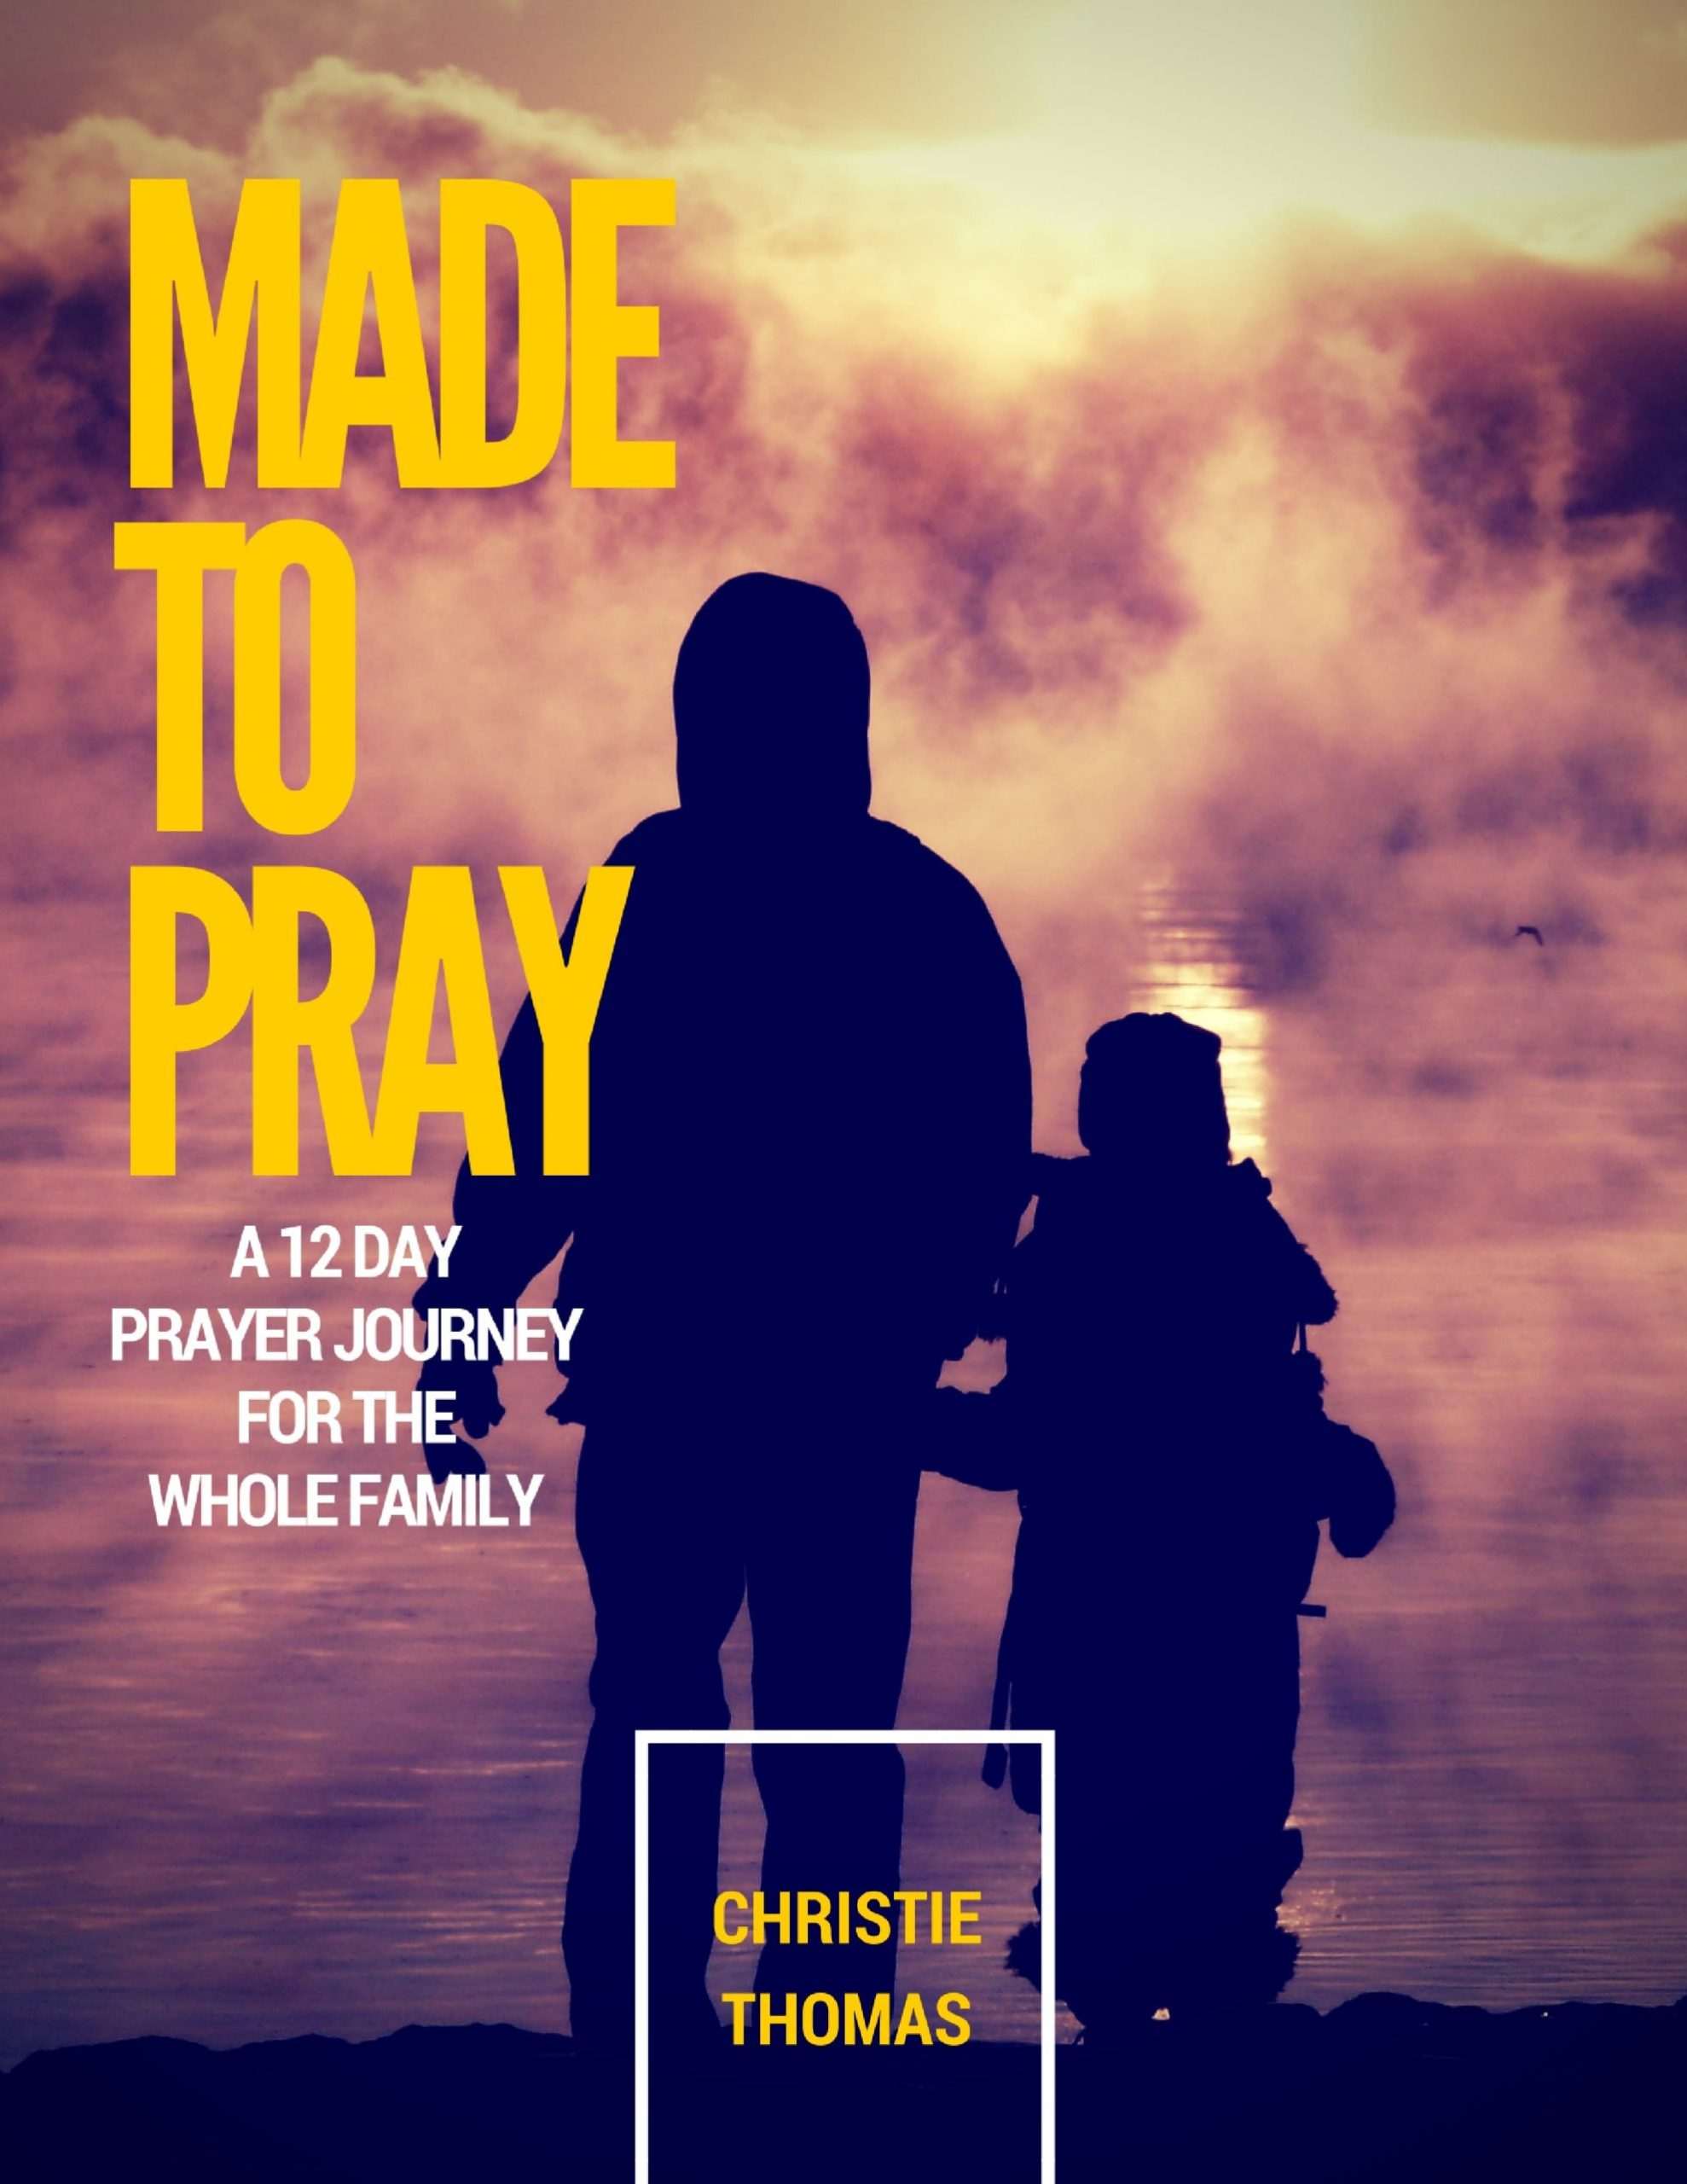 Made to pray: a 12 day prayer journey for the whole family